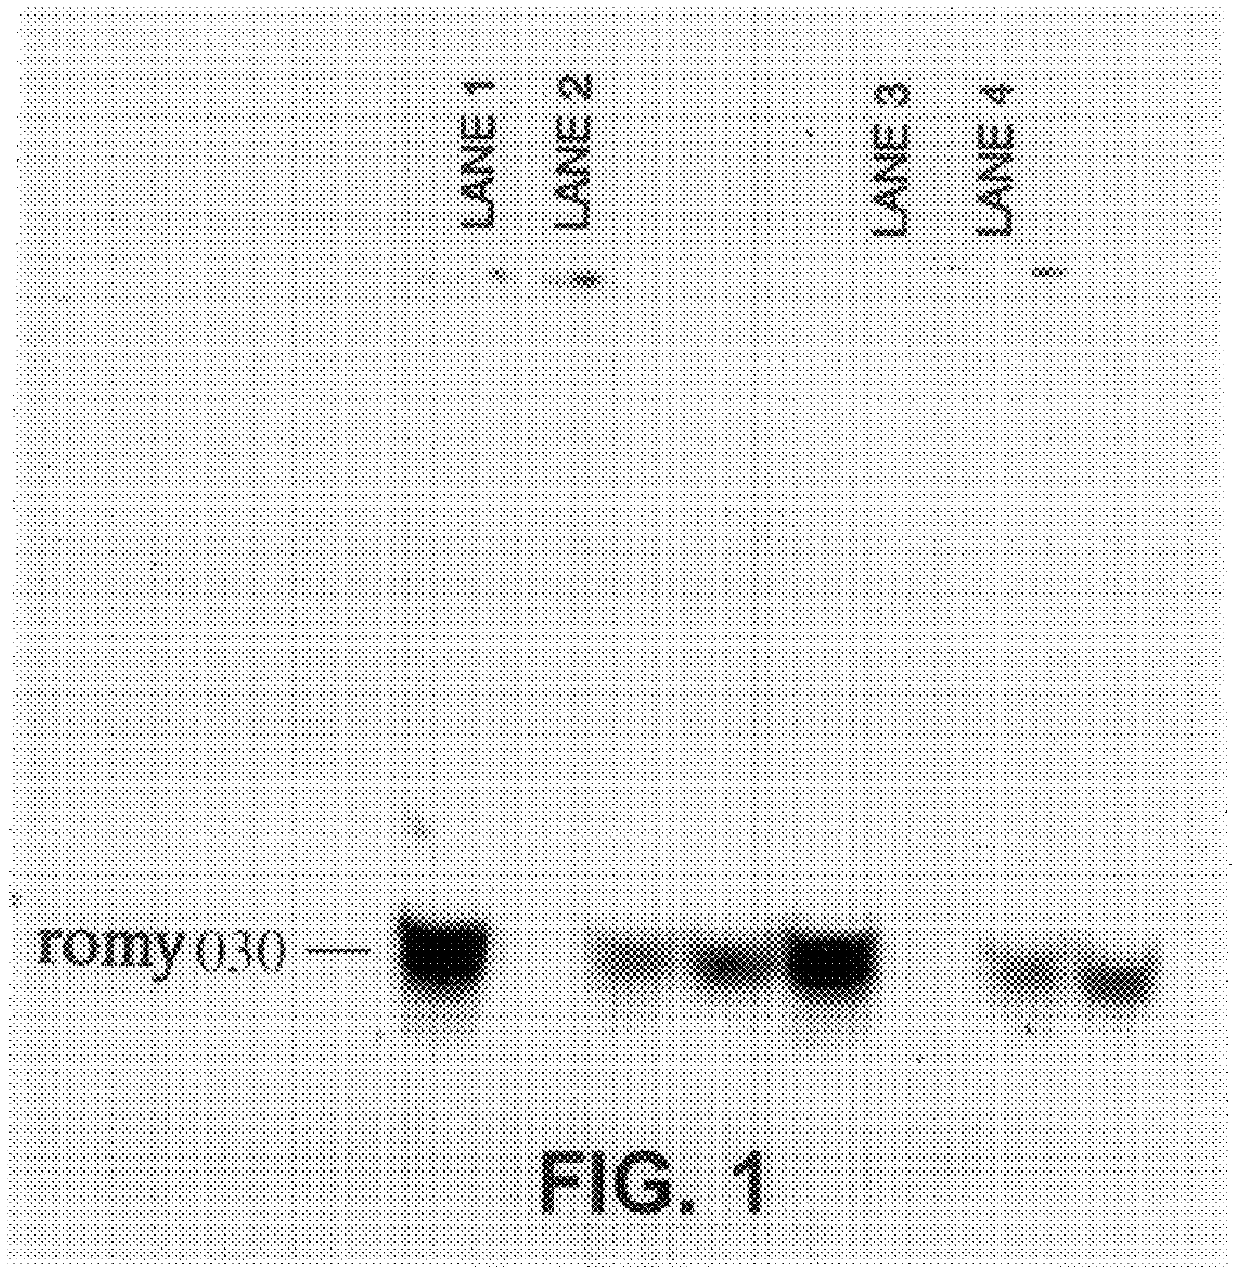 Compositions and methods for the diagnosis, prevention and treatment of tumor progression